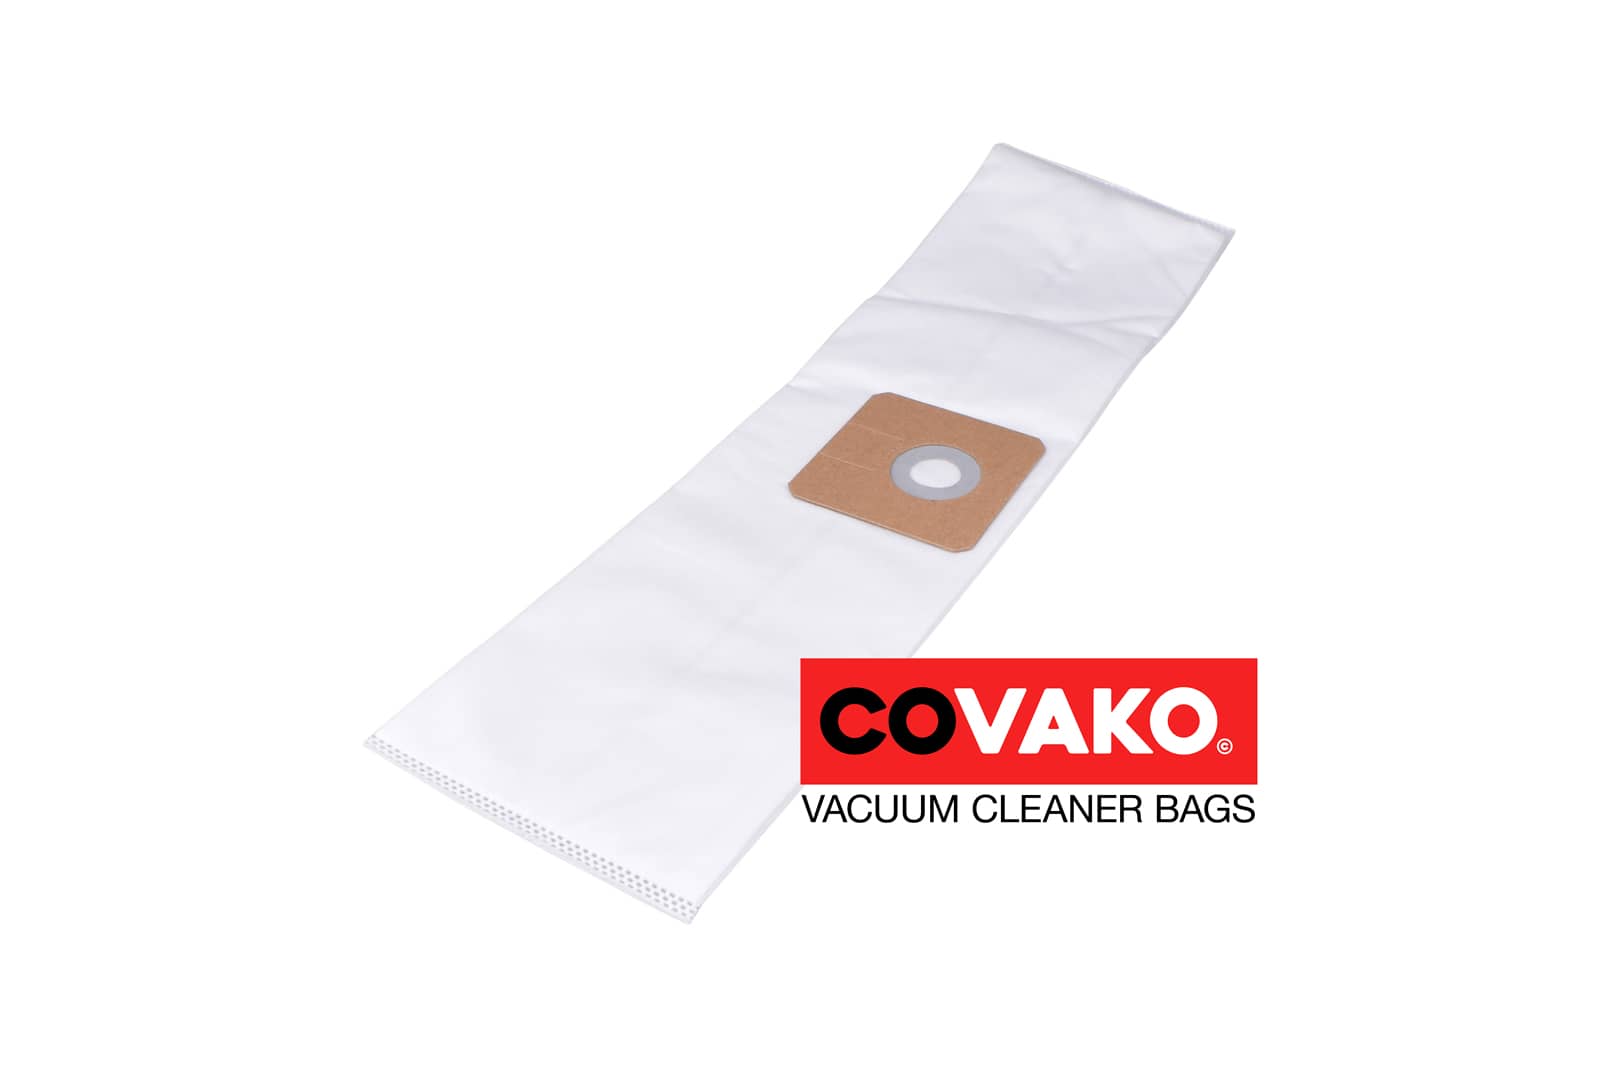 TMB Piccolo Pro / Synthesis - TMB vacuum cleaner bags